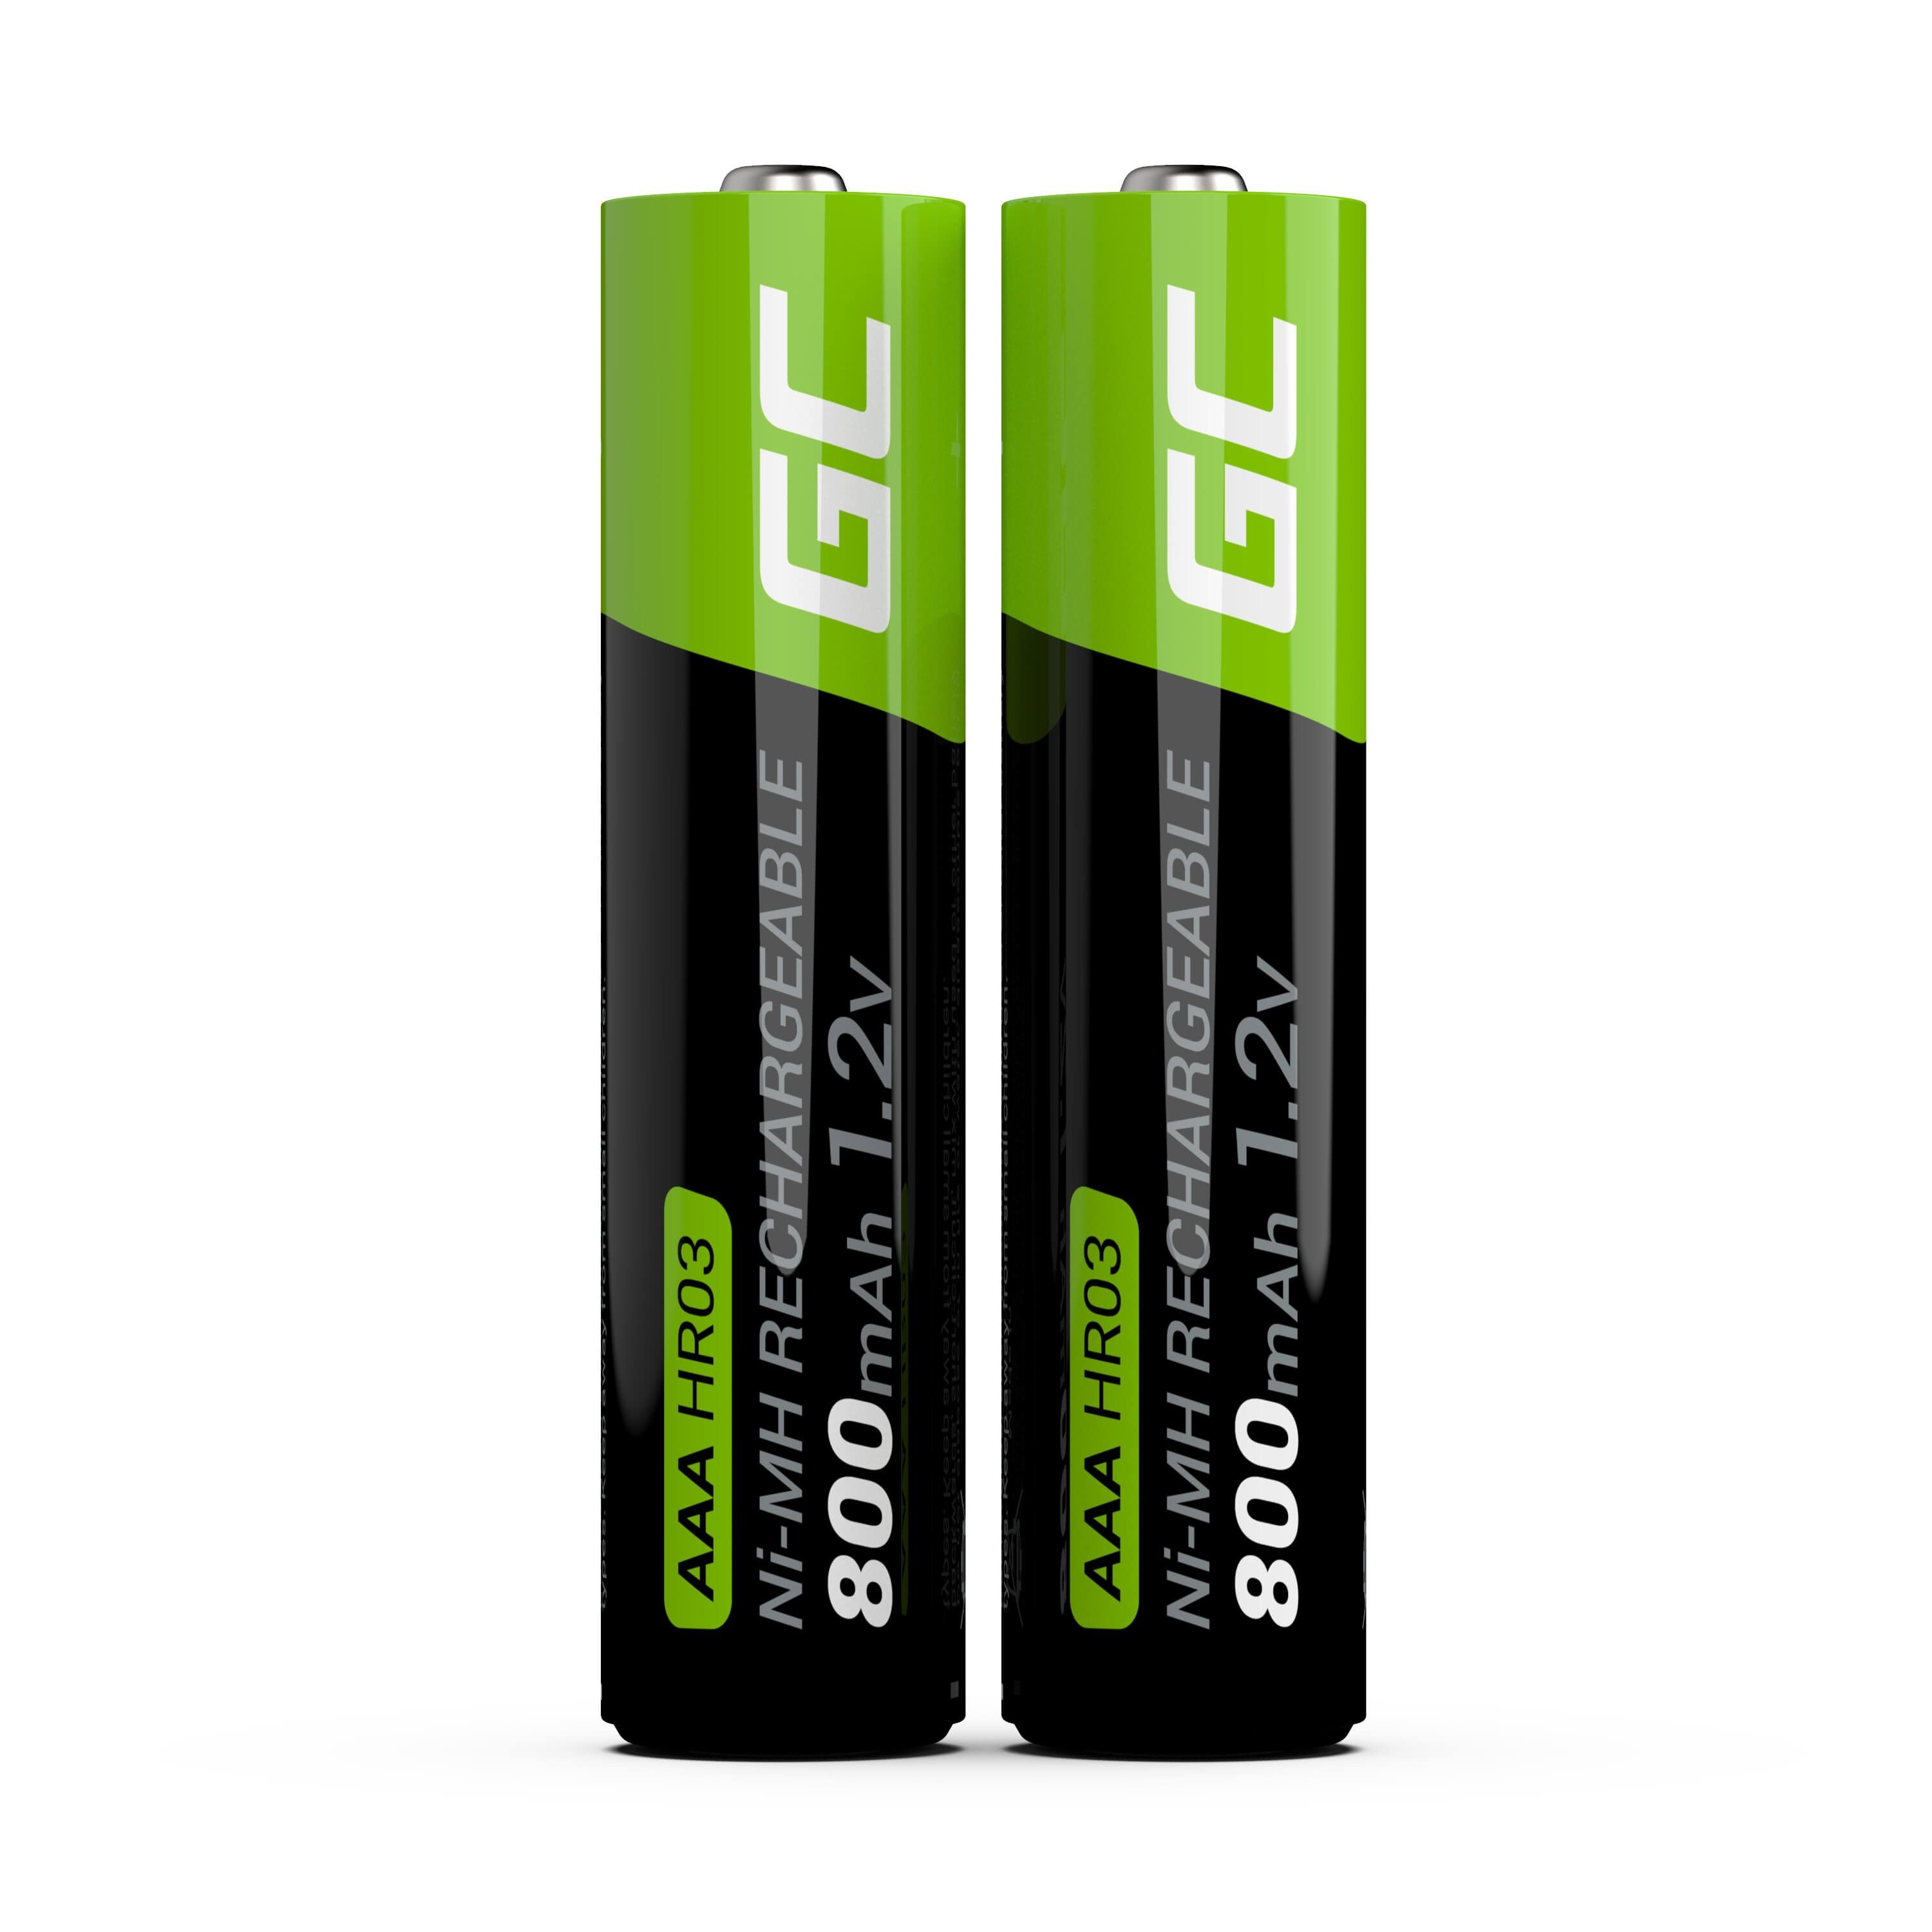 Green Cell GR08 household battery Rechargeable battery AAA Nickel-Metal Hydride (NiMH) 2X AAA R3 800MAH_2